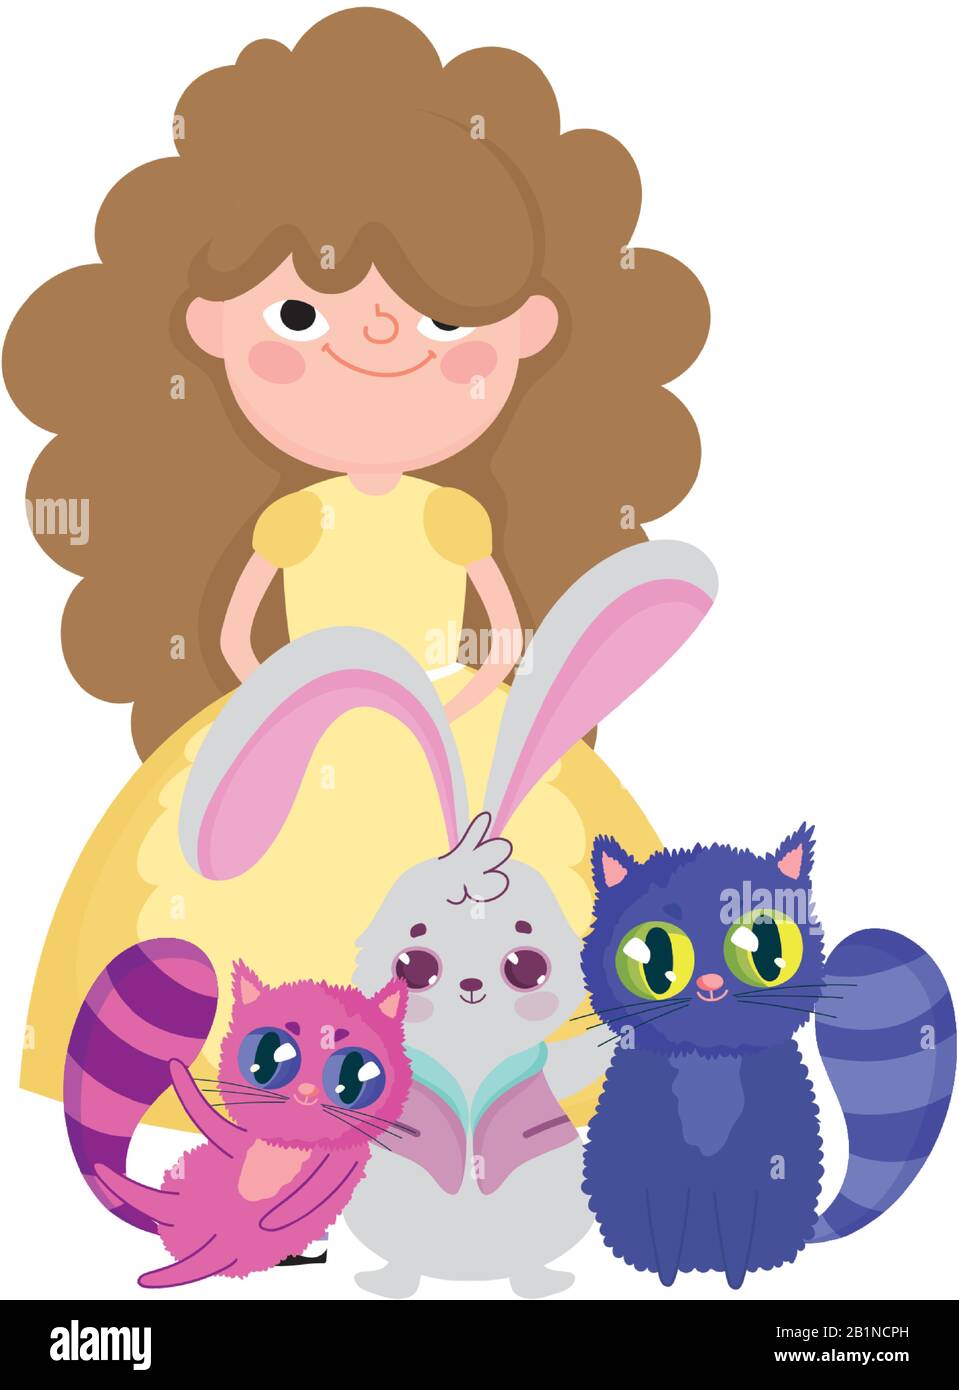 girl with cats and rabbit wonderland cartoon characters vector illustration Stock Vector